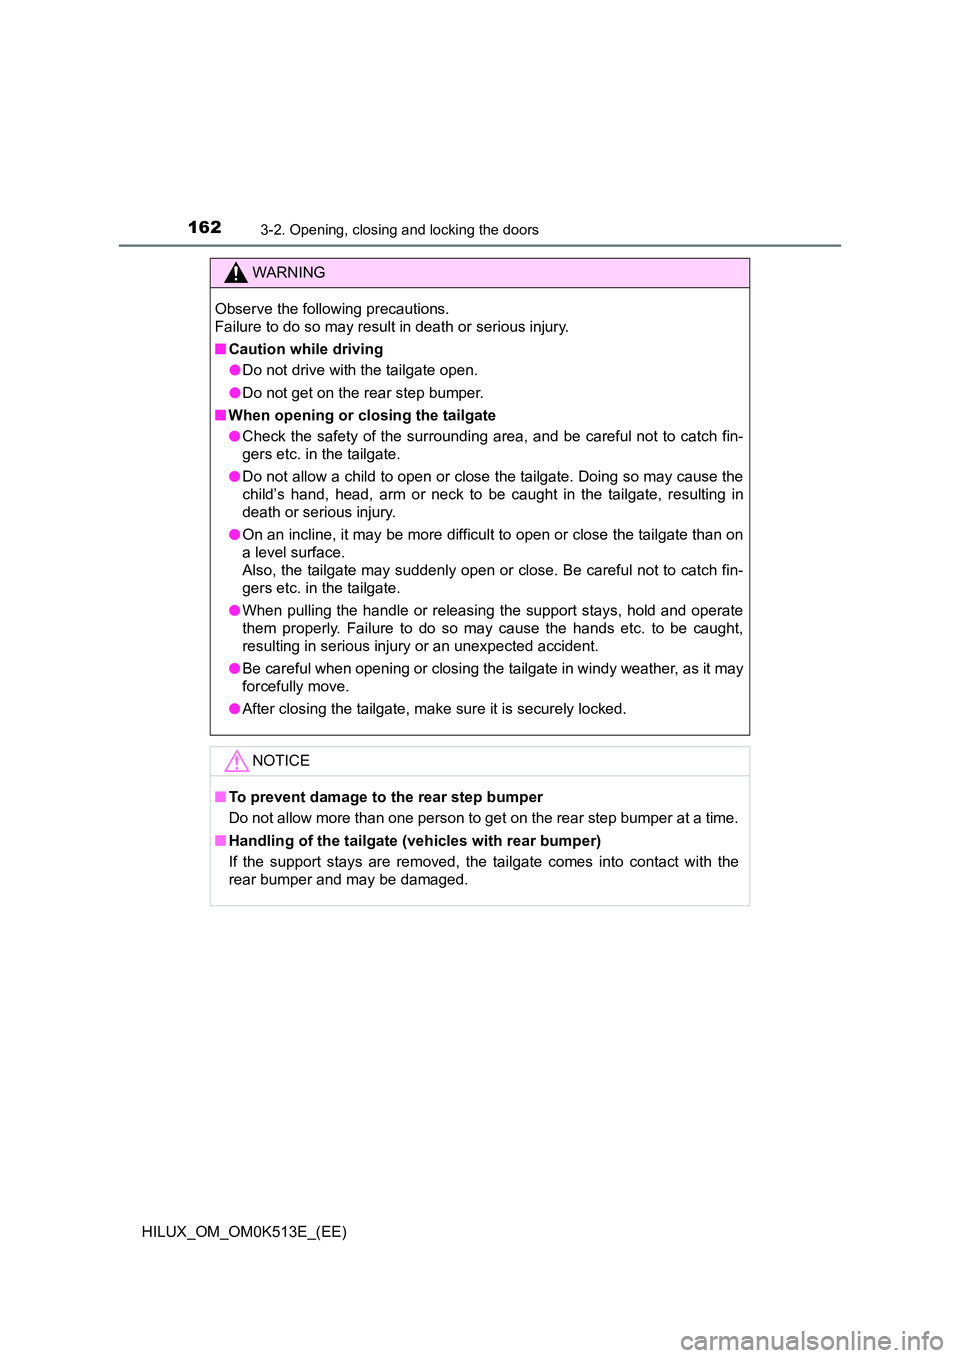 TOYOTA HILUX 2021  Owners Manual (in English) 1623-2. Opening, closing and locking the doors
HILUX_OM_OM0K513E_(EE)
WARNING
Observe the following precautions.  
Failure to do so may result in death or serious injury. 
�Q Caution while driving 
�O